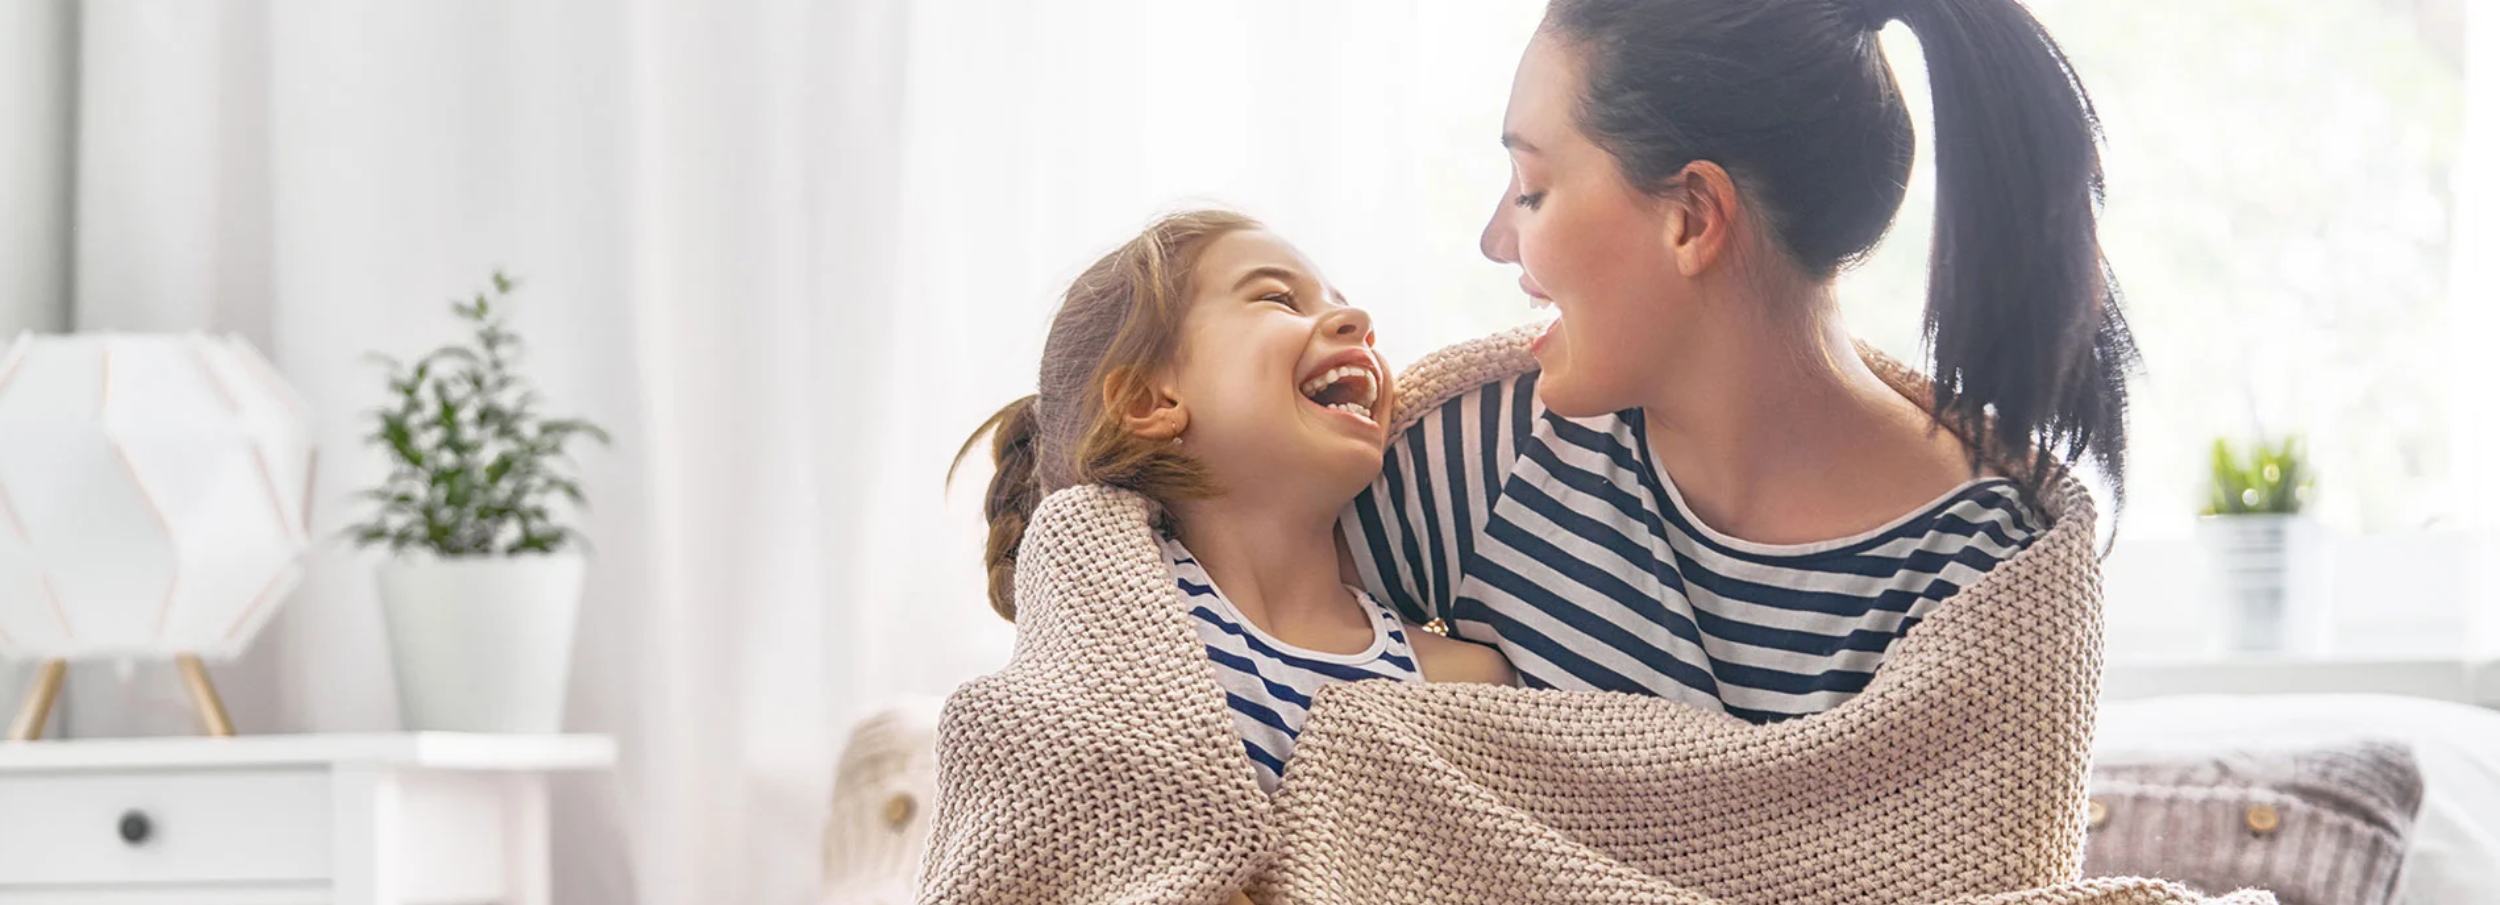 Mother and daughter wrapped in a blanket and laughing at each other.